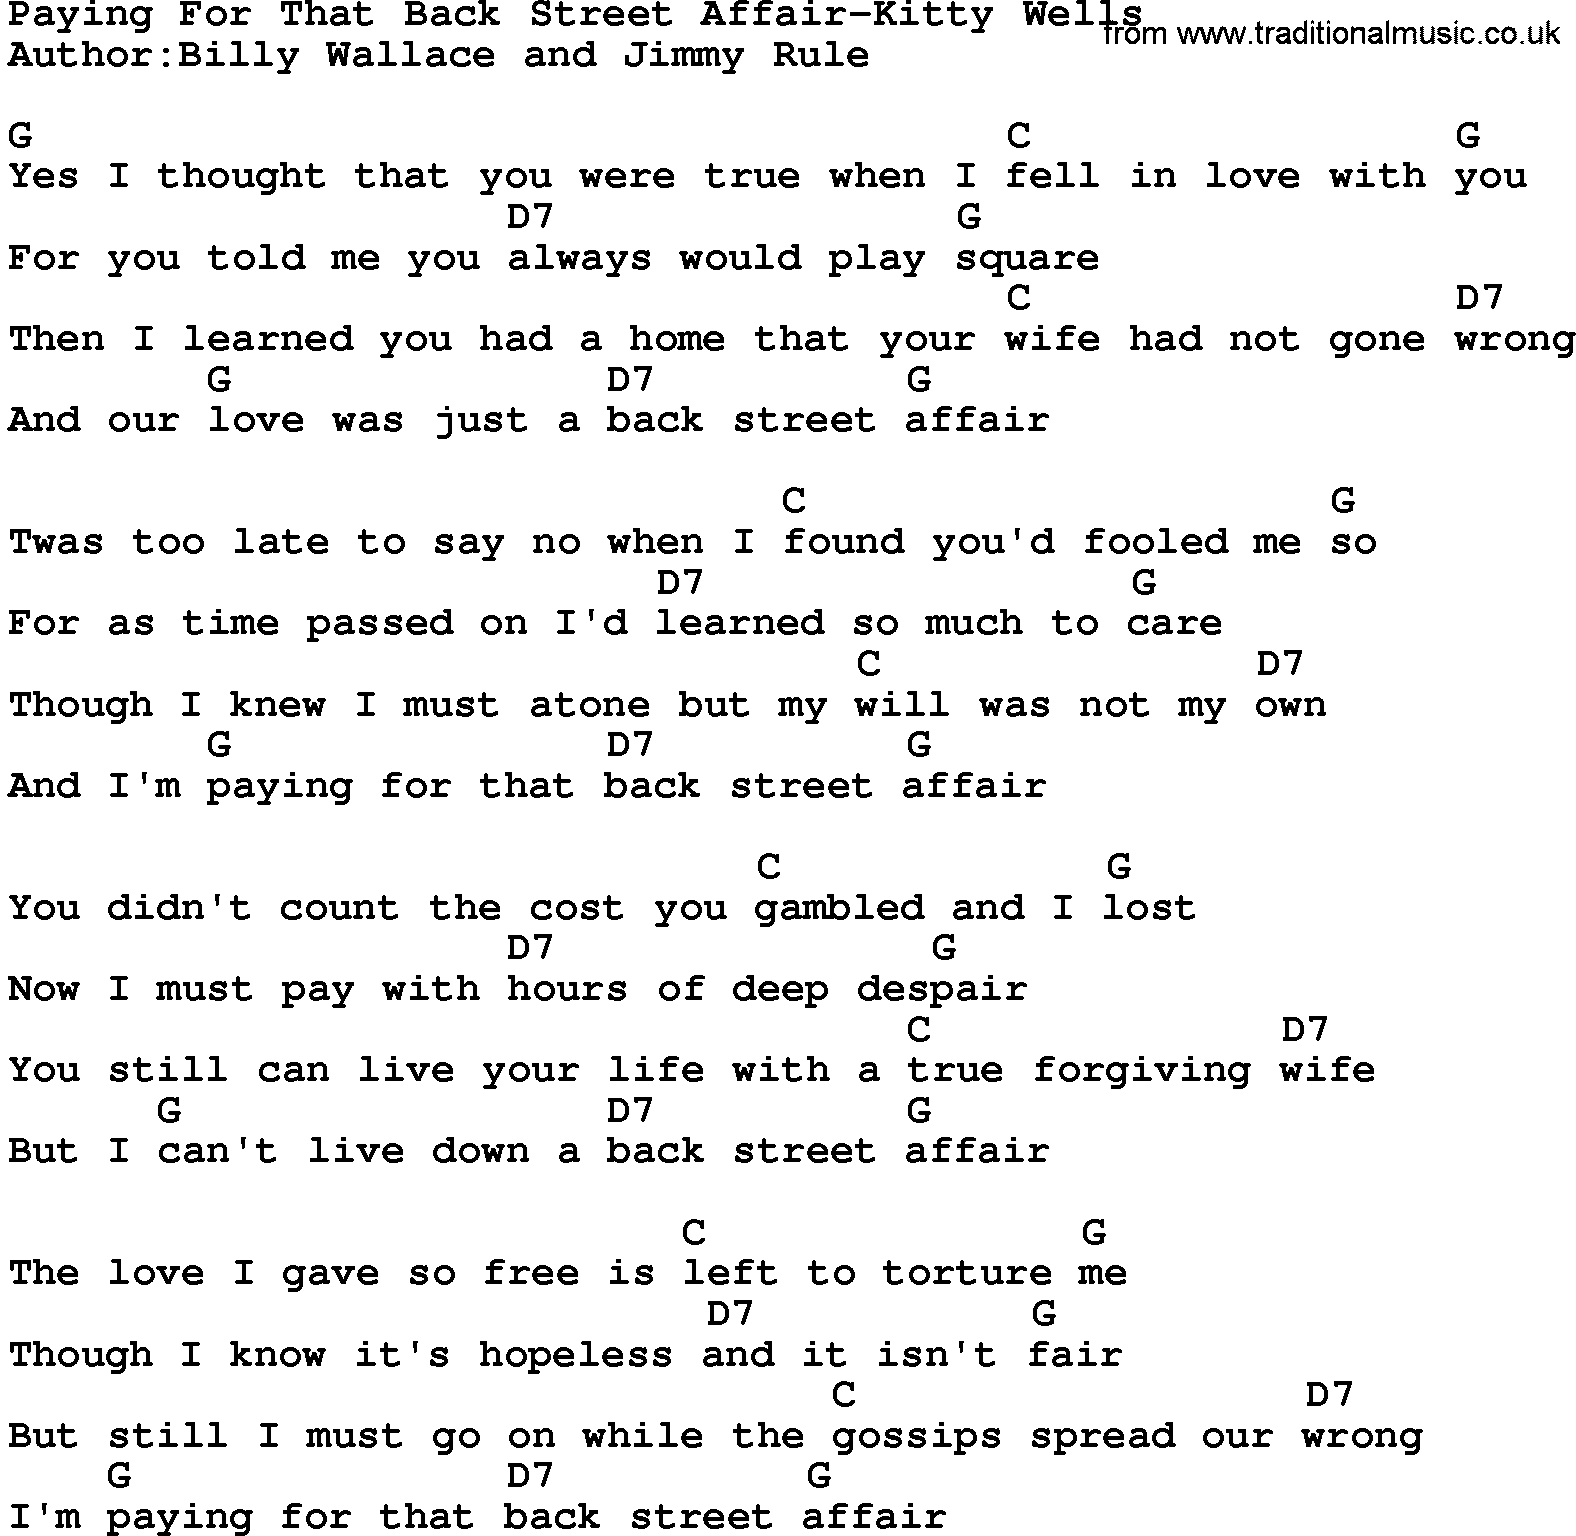 Country music song: Paying For That Back Street Affair-Kitty Wells lyrics and chords